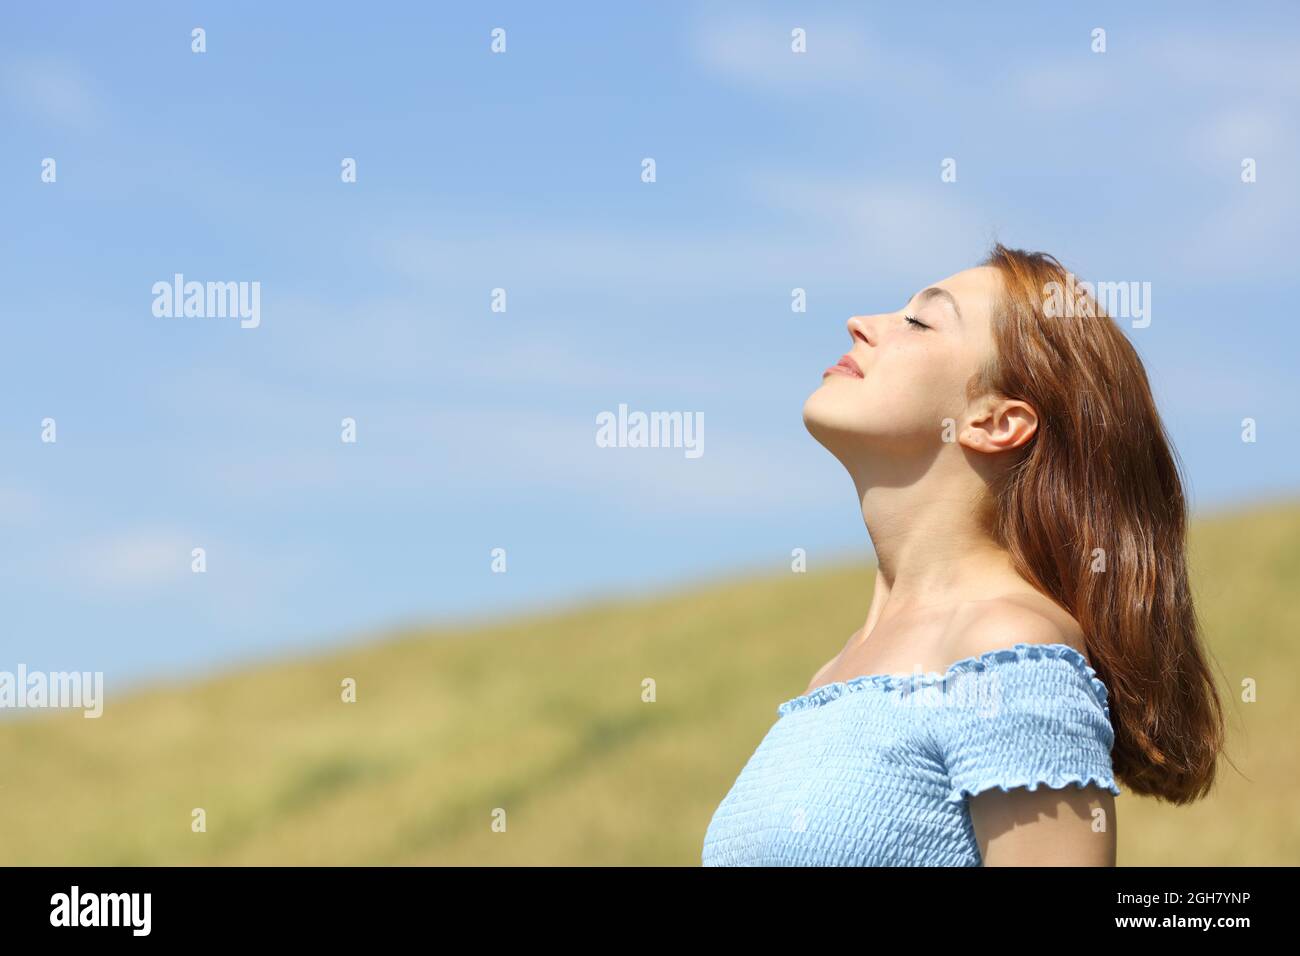 Profile portrait of a happy woman breathing fresh air in a wheat field Stock Photo